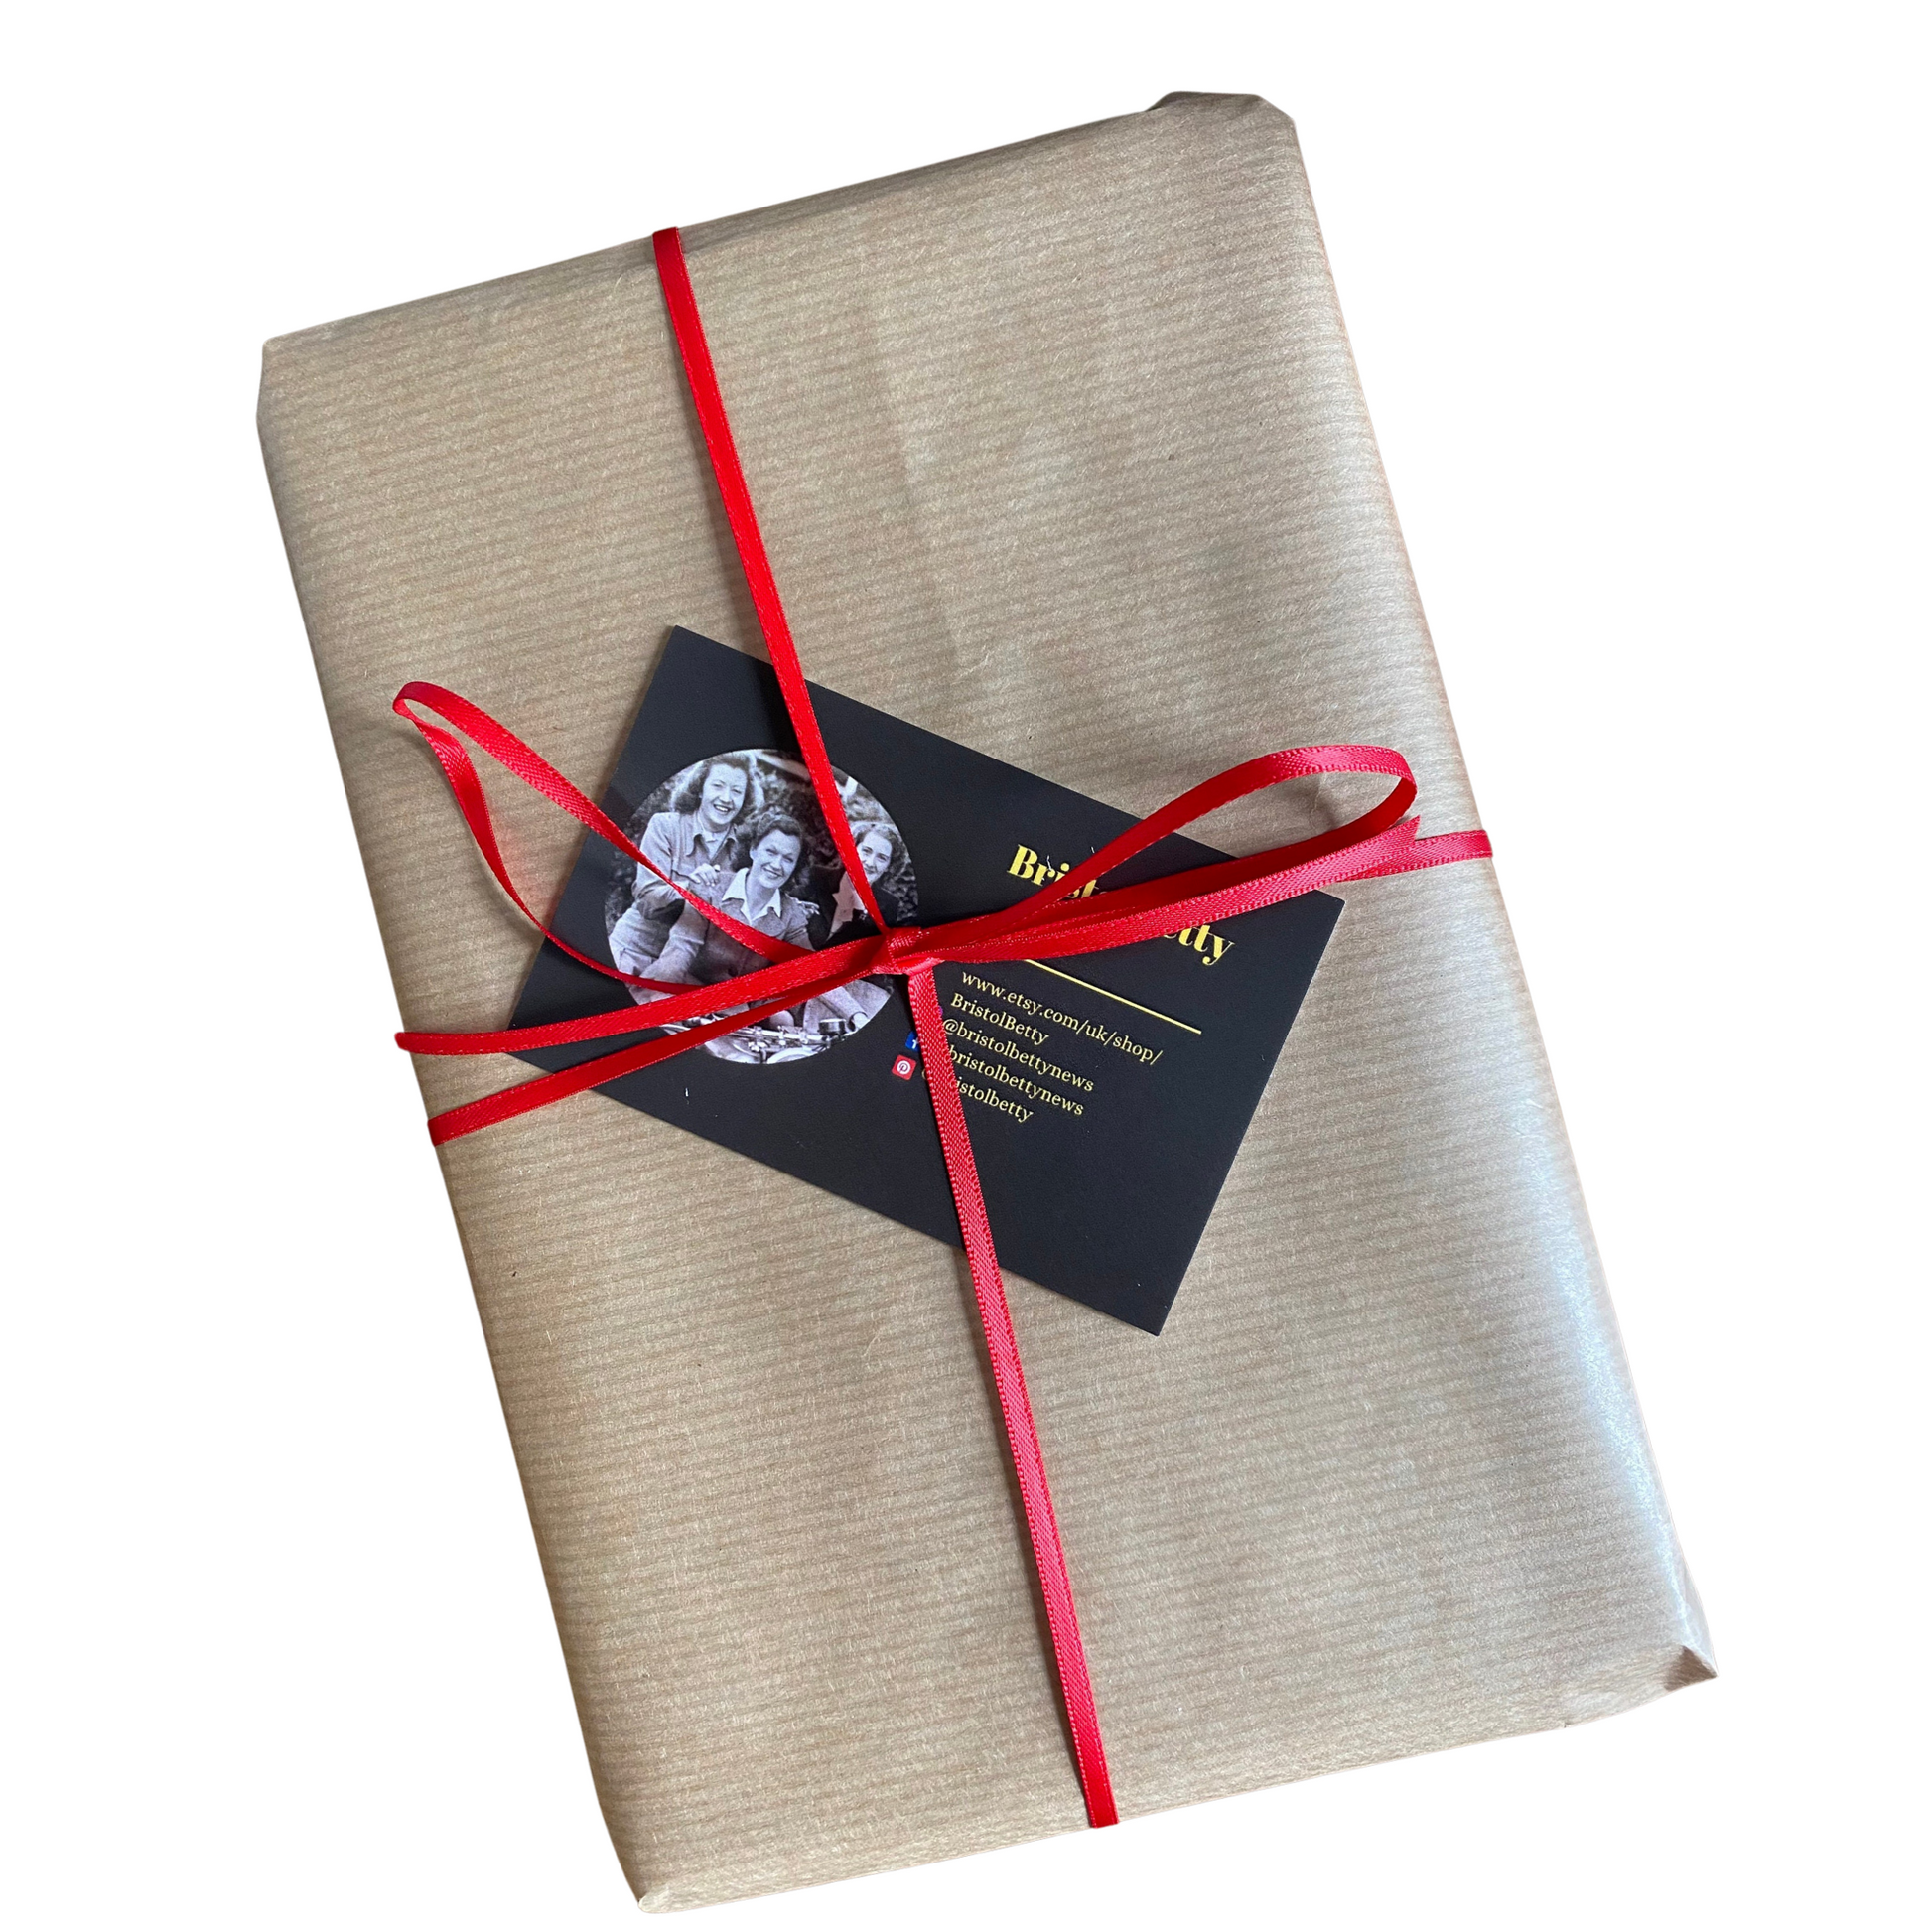 All orders are wrapped in gift paper and ribbon 